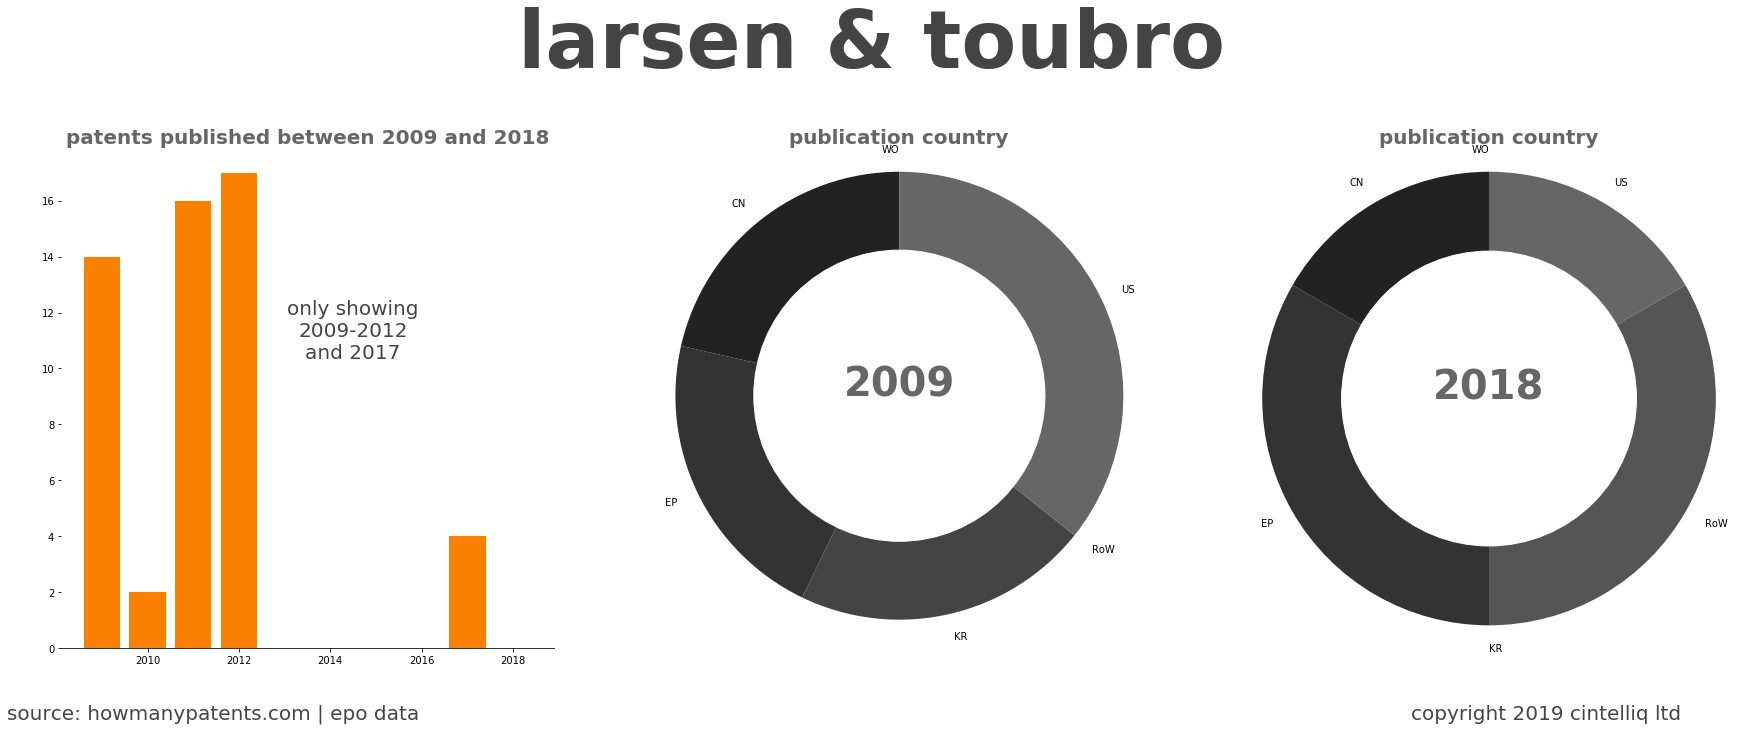 summary of patents for Larsen & Toubro